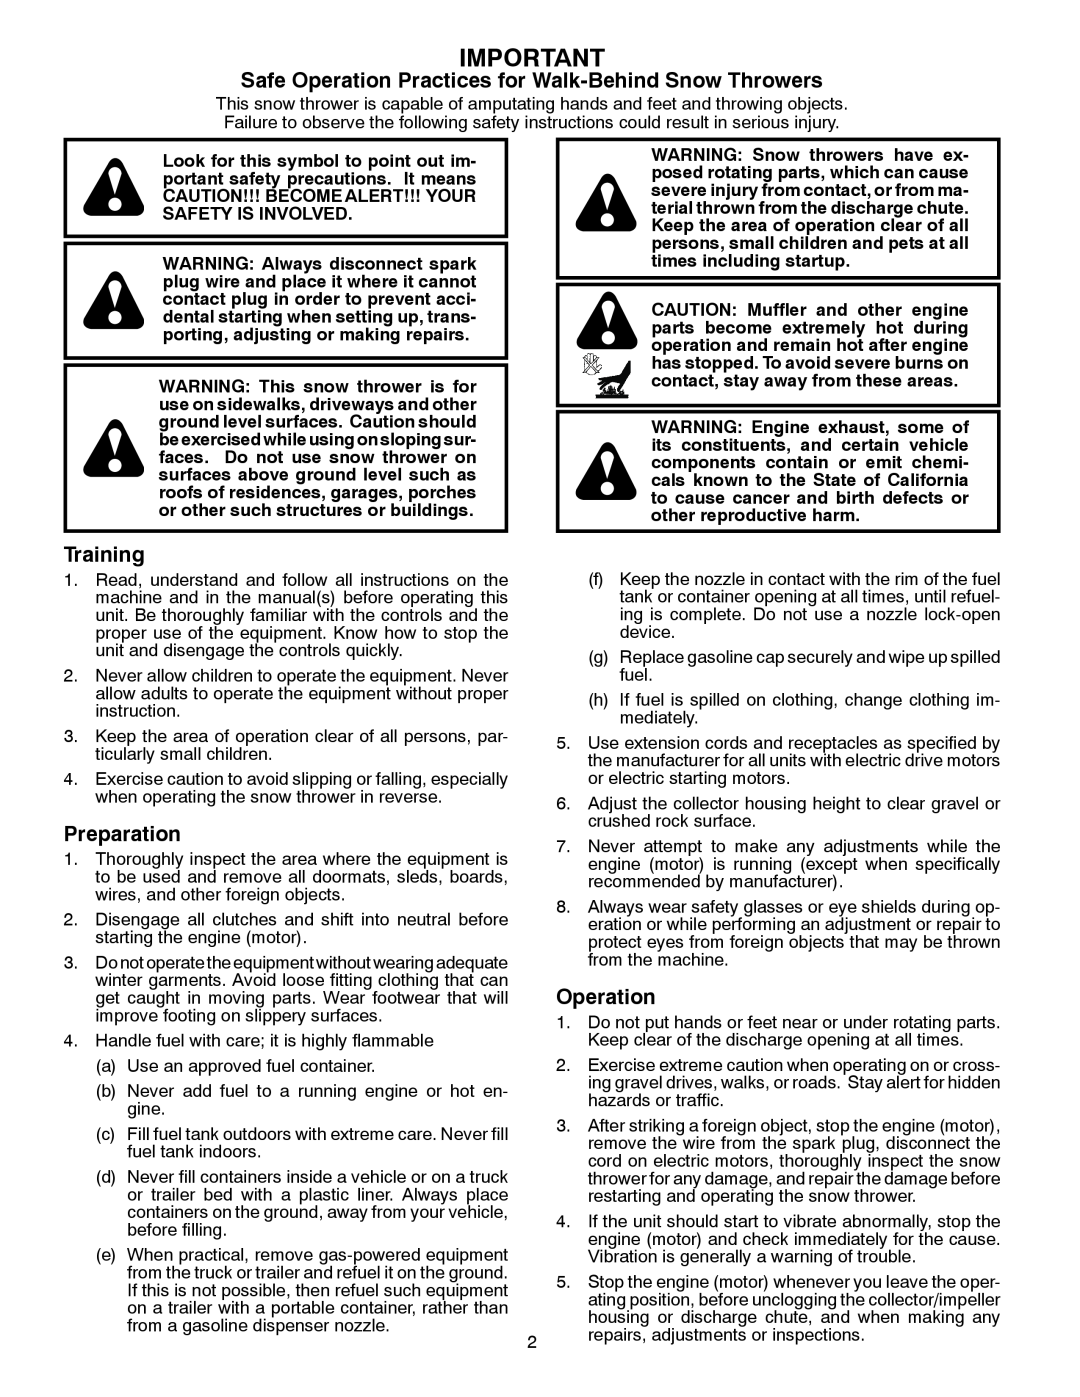 McCulloch 96192004102 owner manual Safe Operation Practices for Walk-Behind Snow Throwers, Training, Preparation 